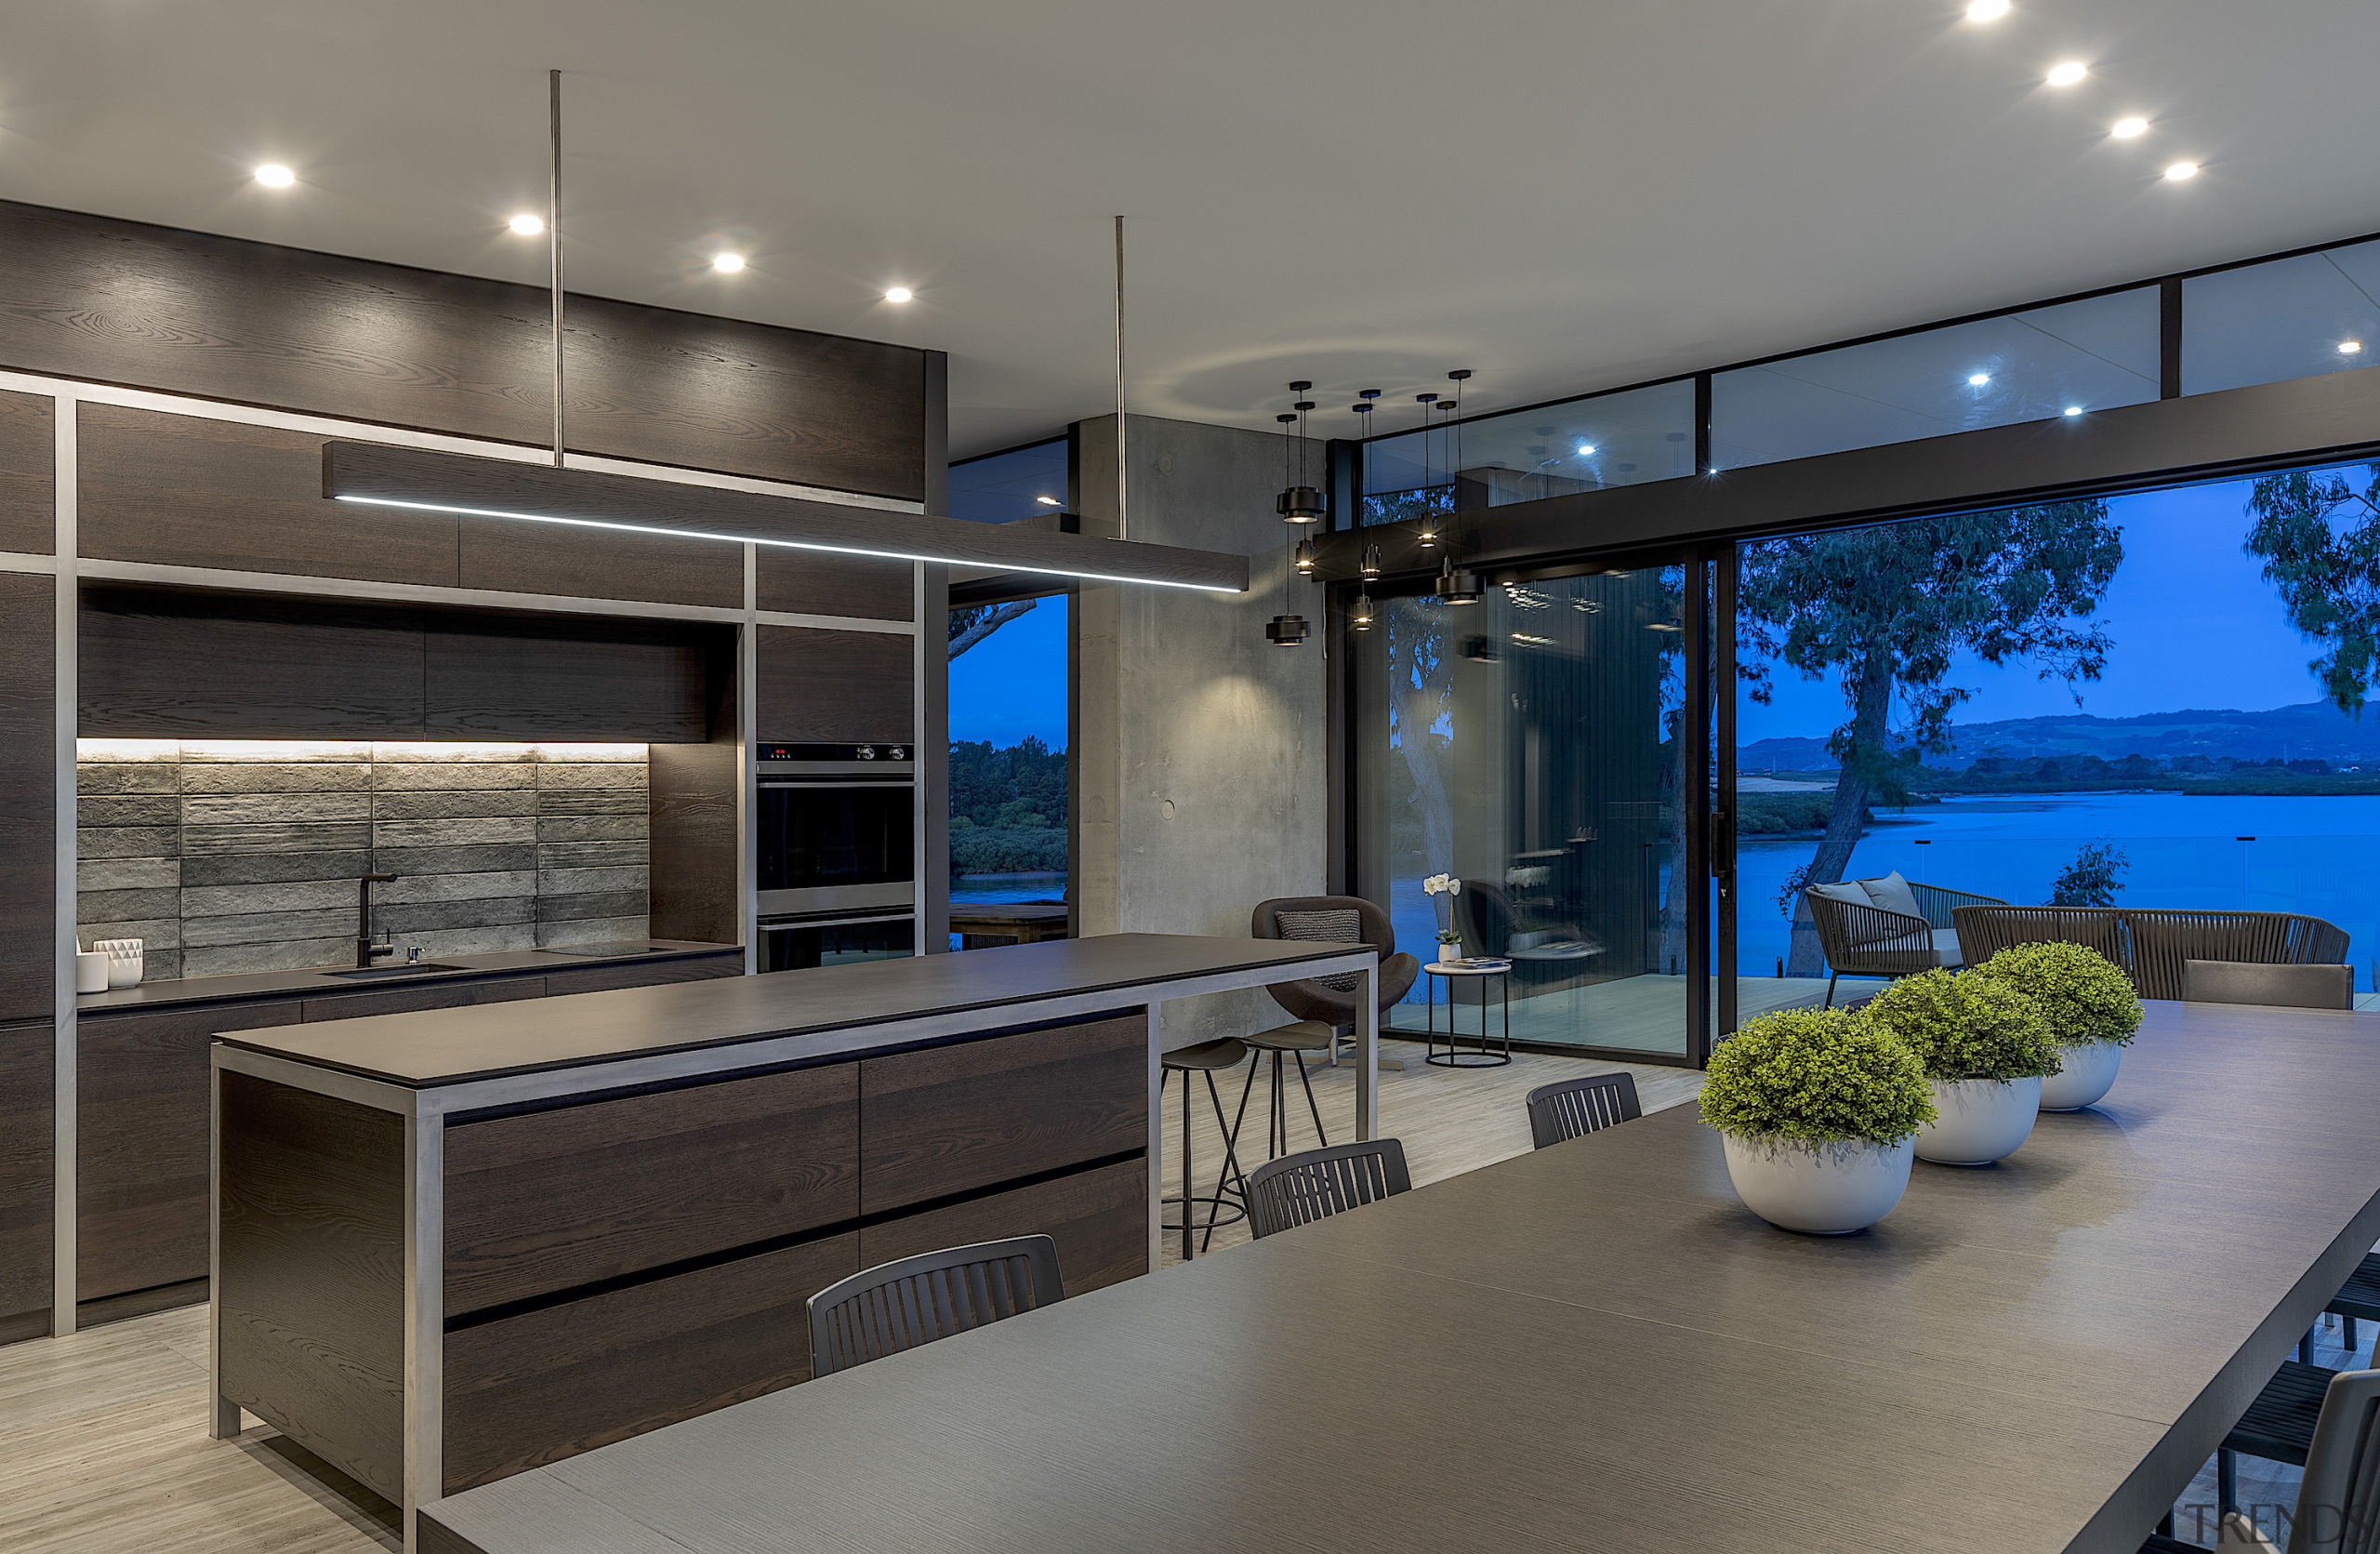 The strong interiors in this home, kitchen included, gray, black